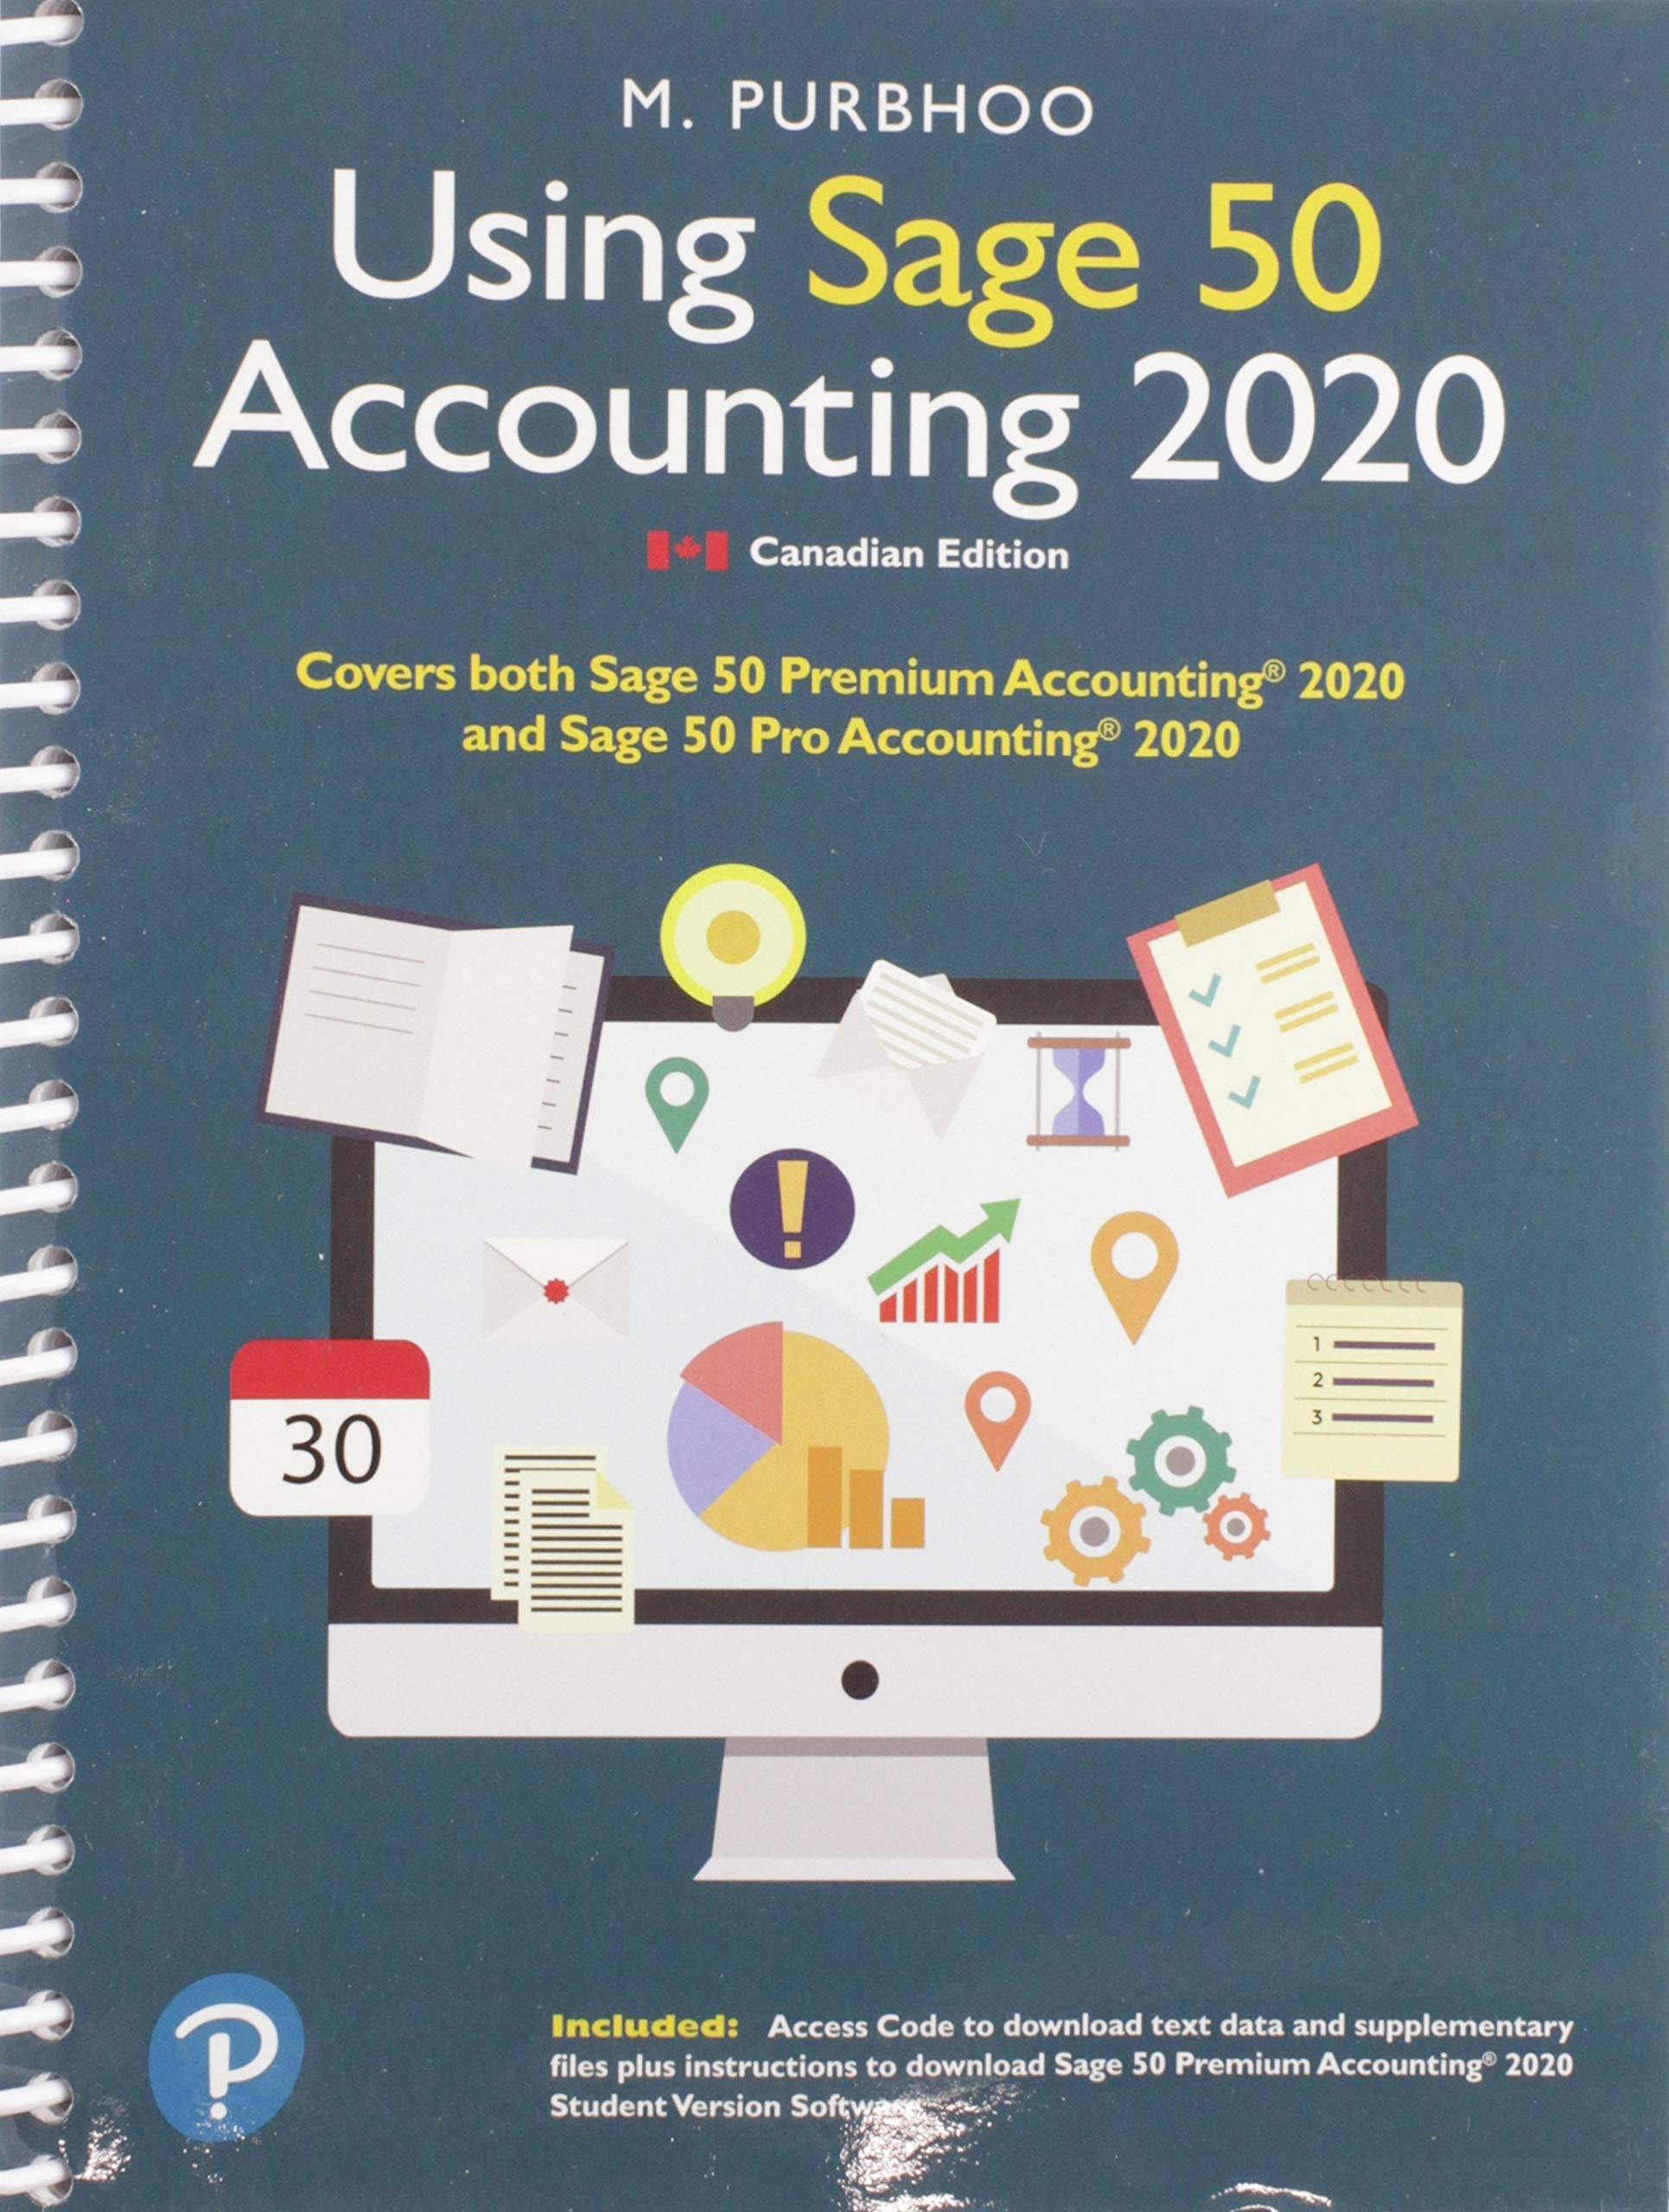 using sage 50 accounting 2020 1st canadian edition mary purbhoo 0136655939, 978-0136655930